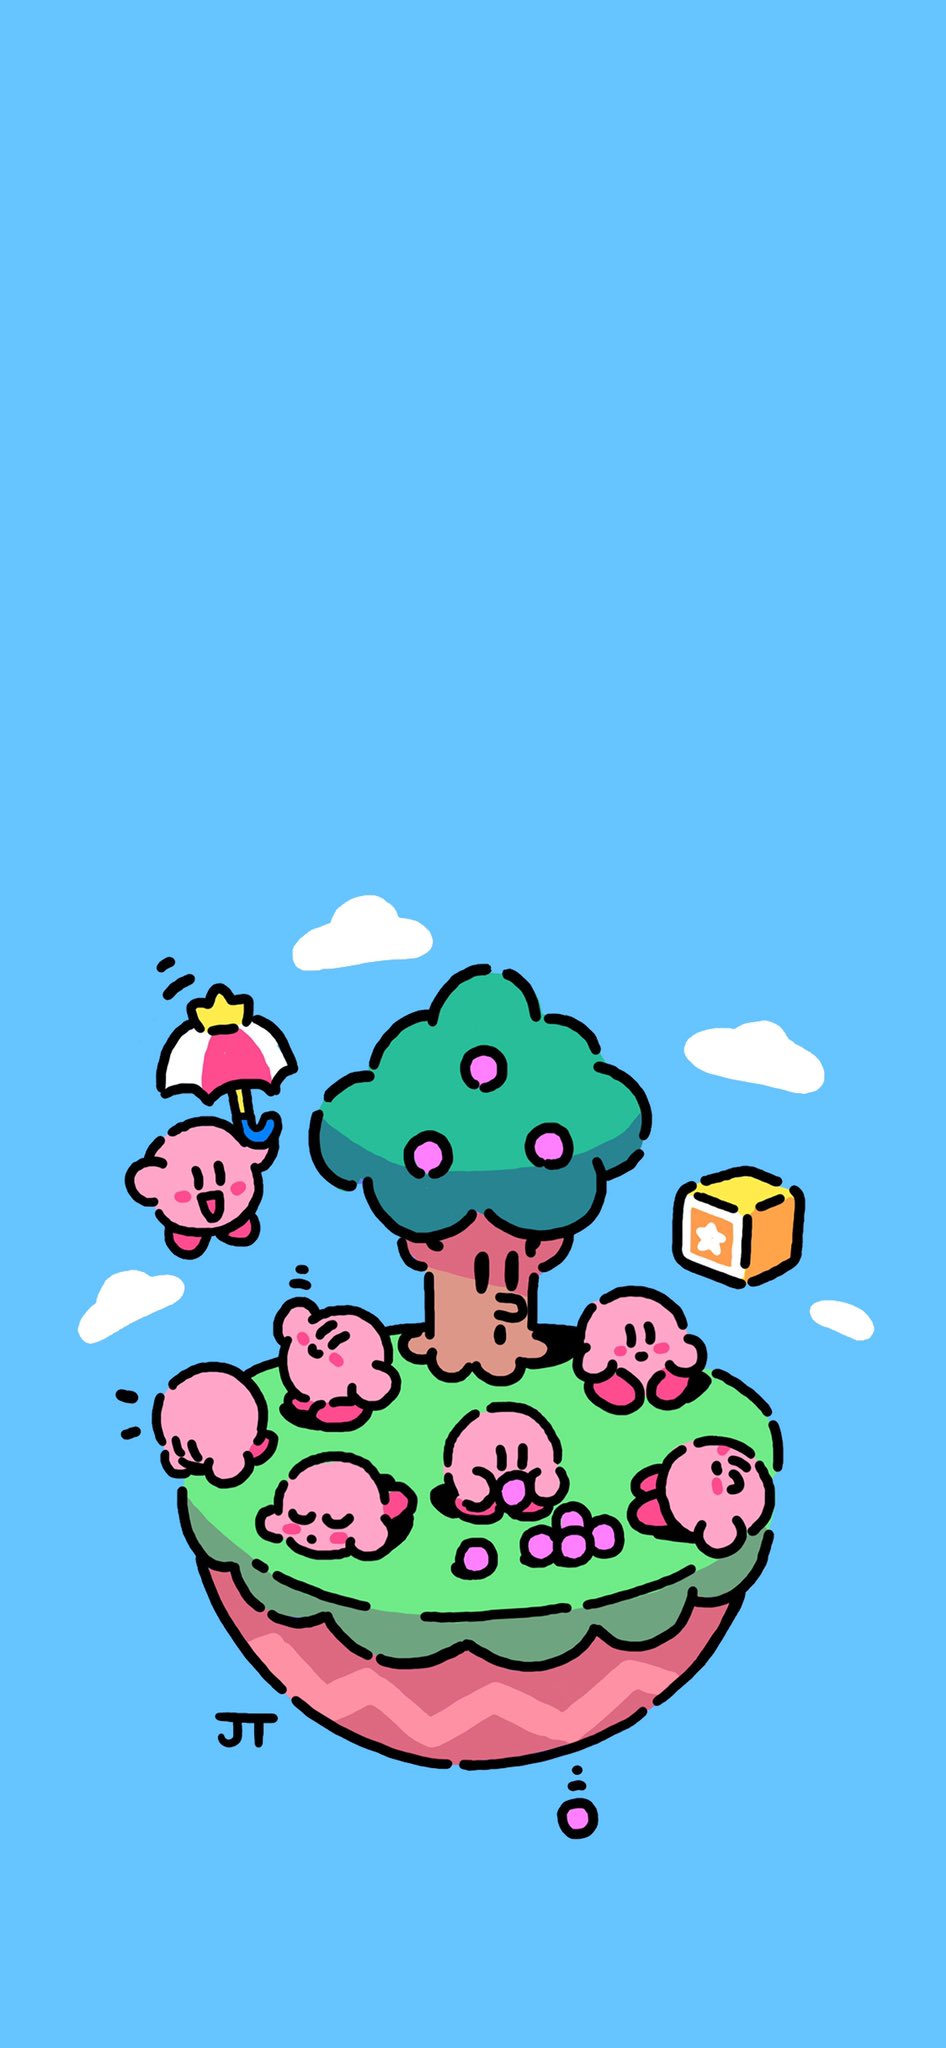 Kirby Informer on Twitter Heres the official Kirby phone wallpaper for  this month from Nintendo Japan httpstcocWqriFogTg  Twitter